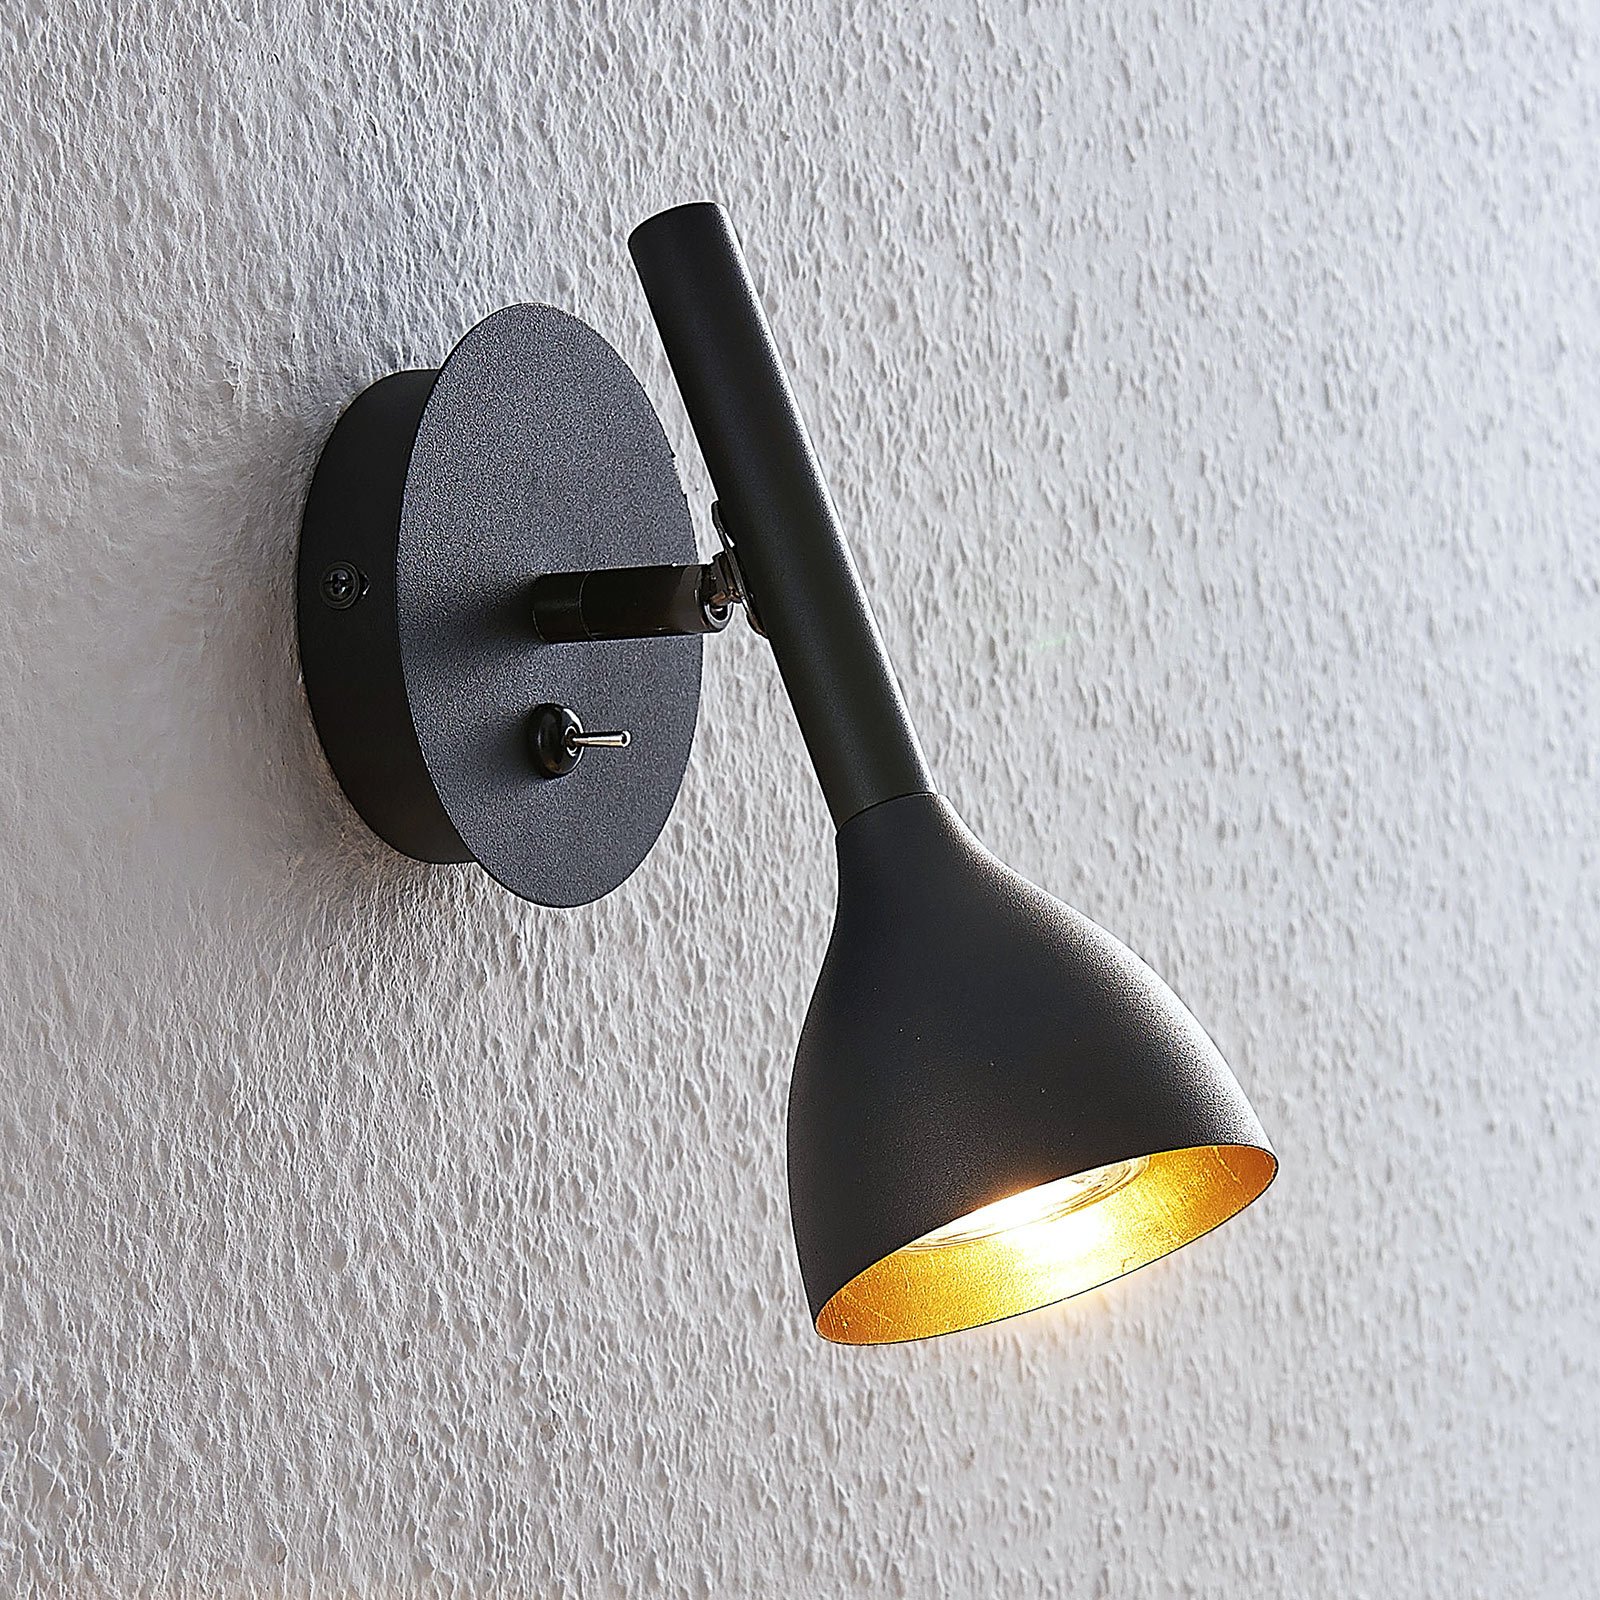 Nordwin wall light, metal, black and gold